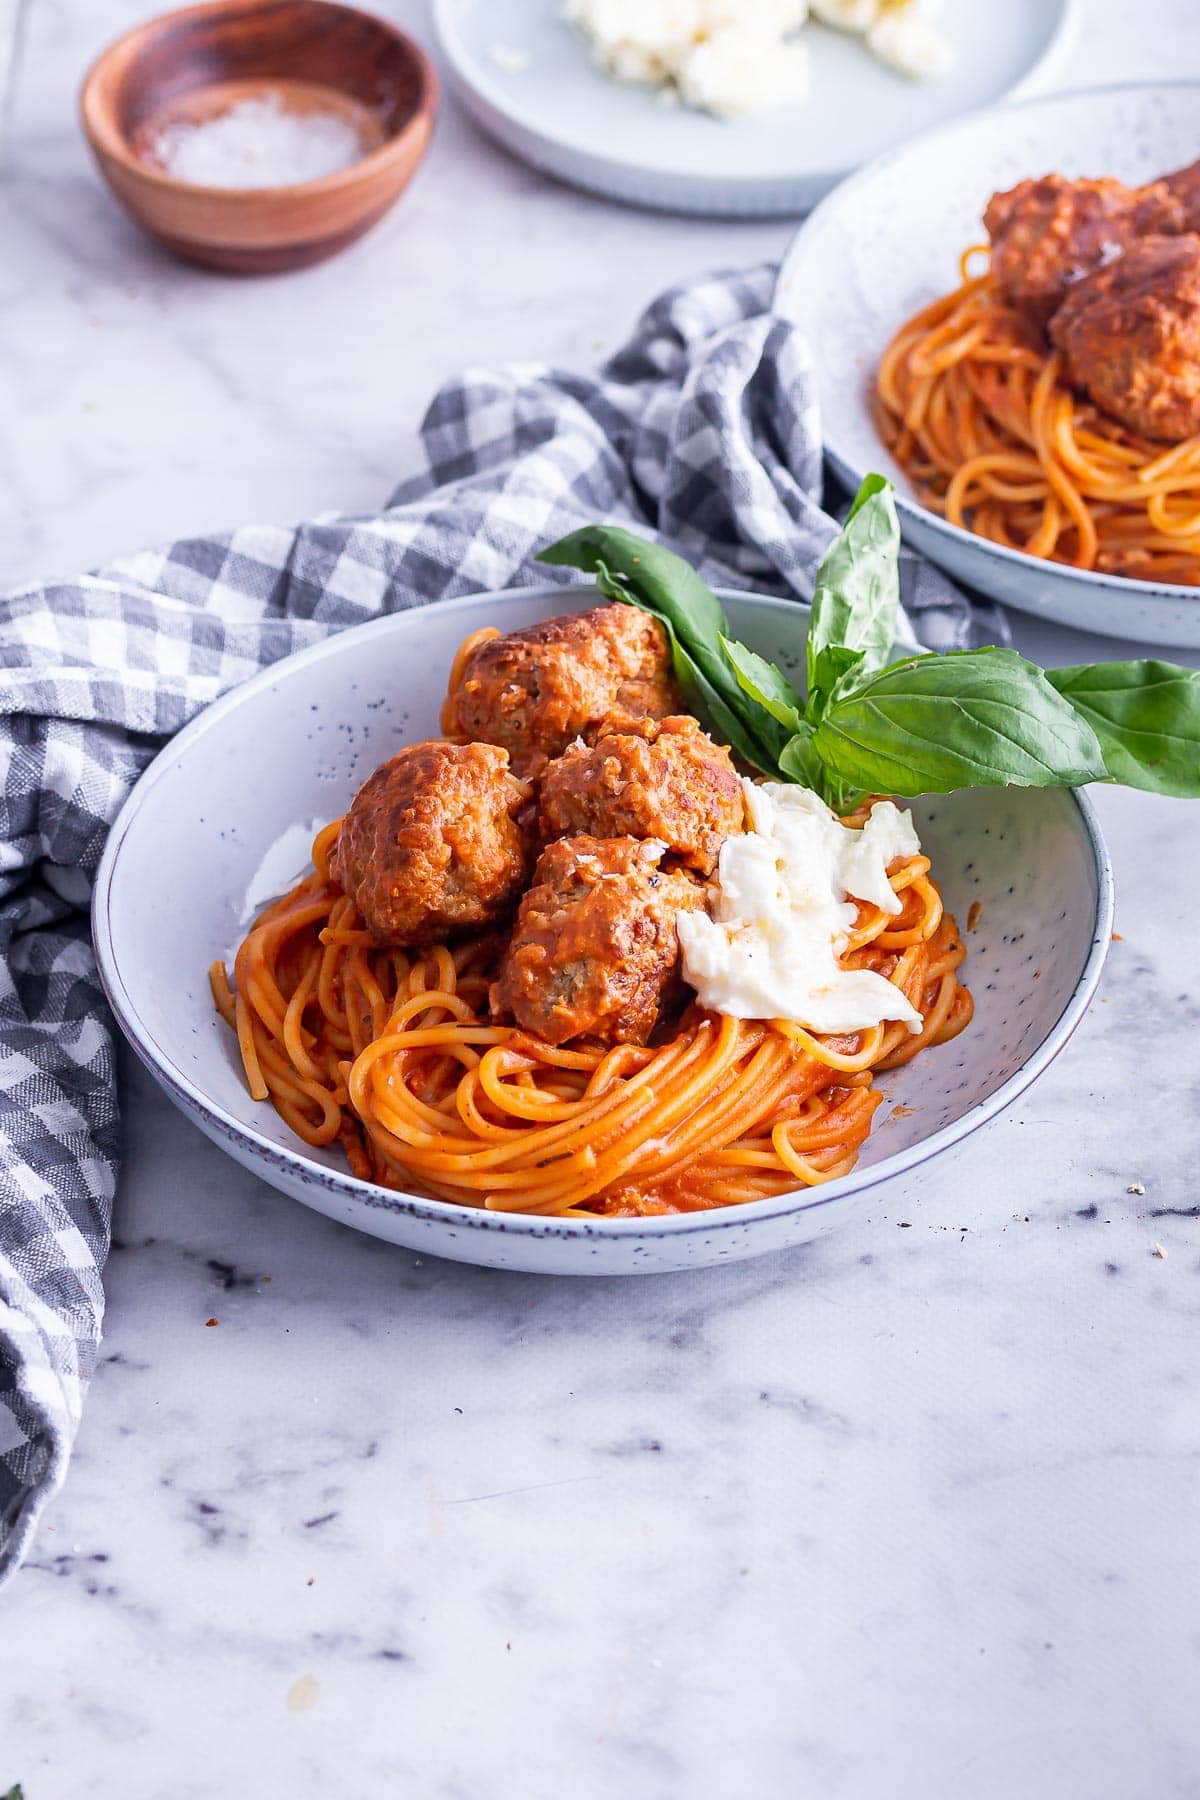 Turkey Meatballs with Spaghetti • The Cook Report